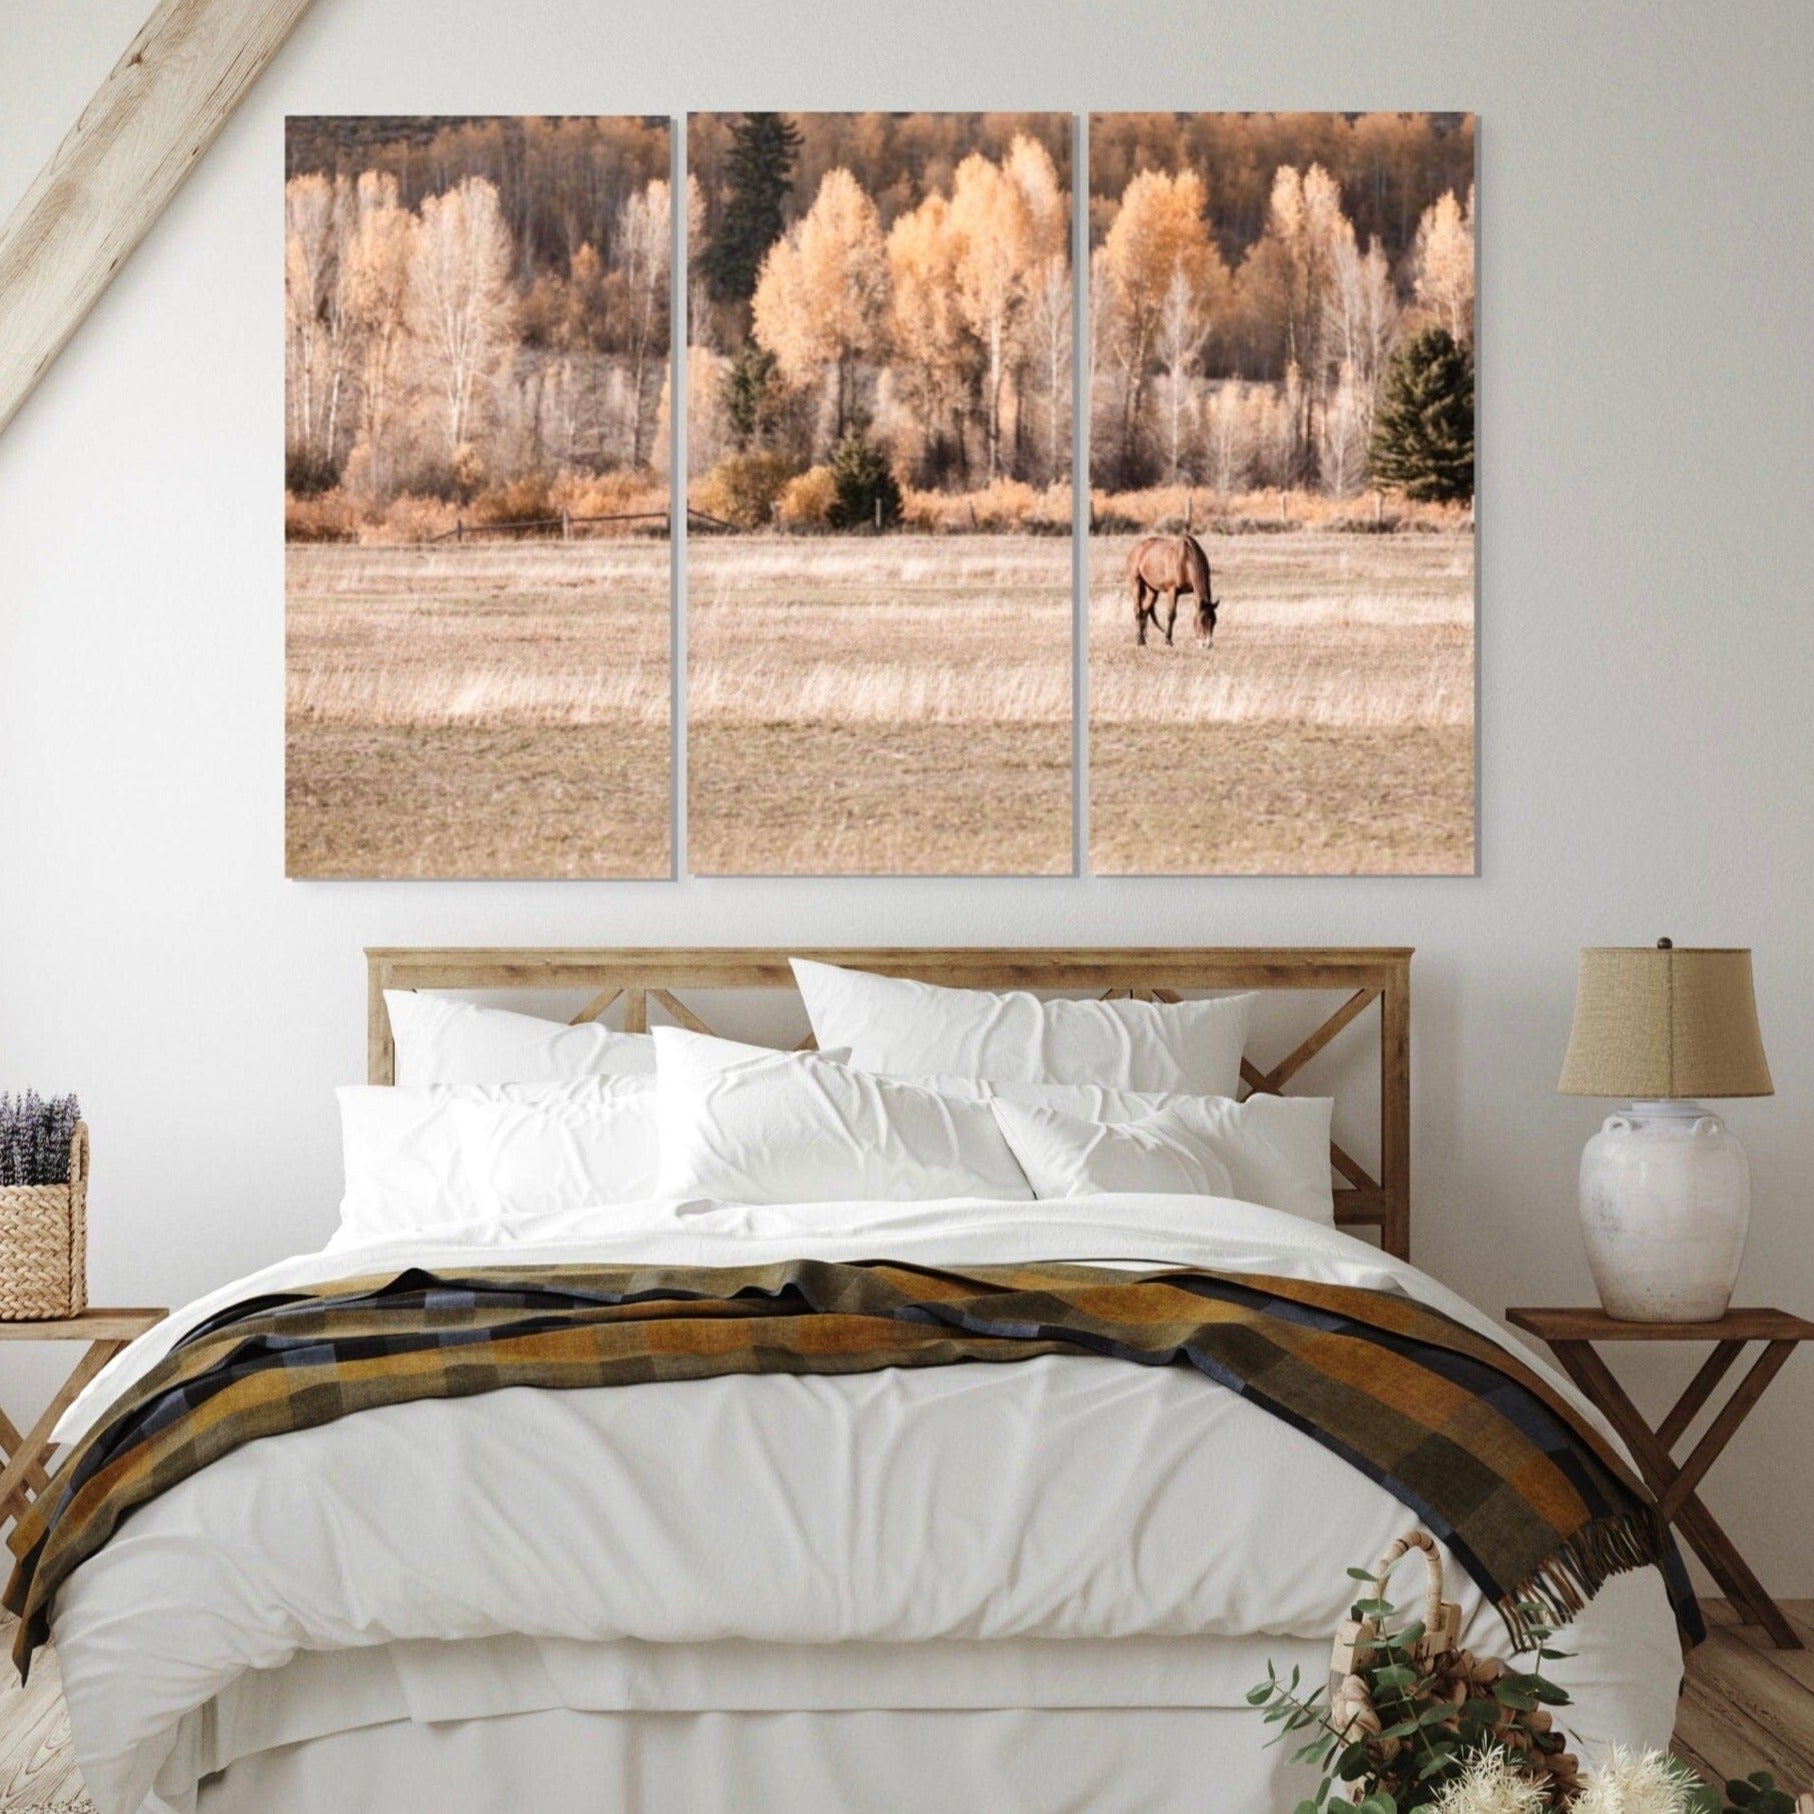 Horse Art for Large Wall - 3 Piece Canvas Triptych Wall Art Teri James Photography